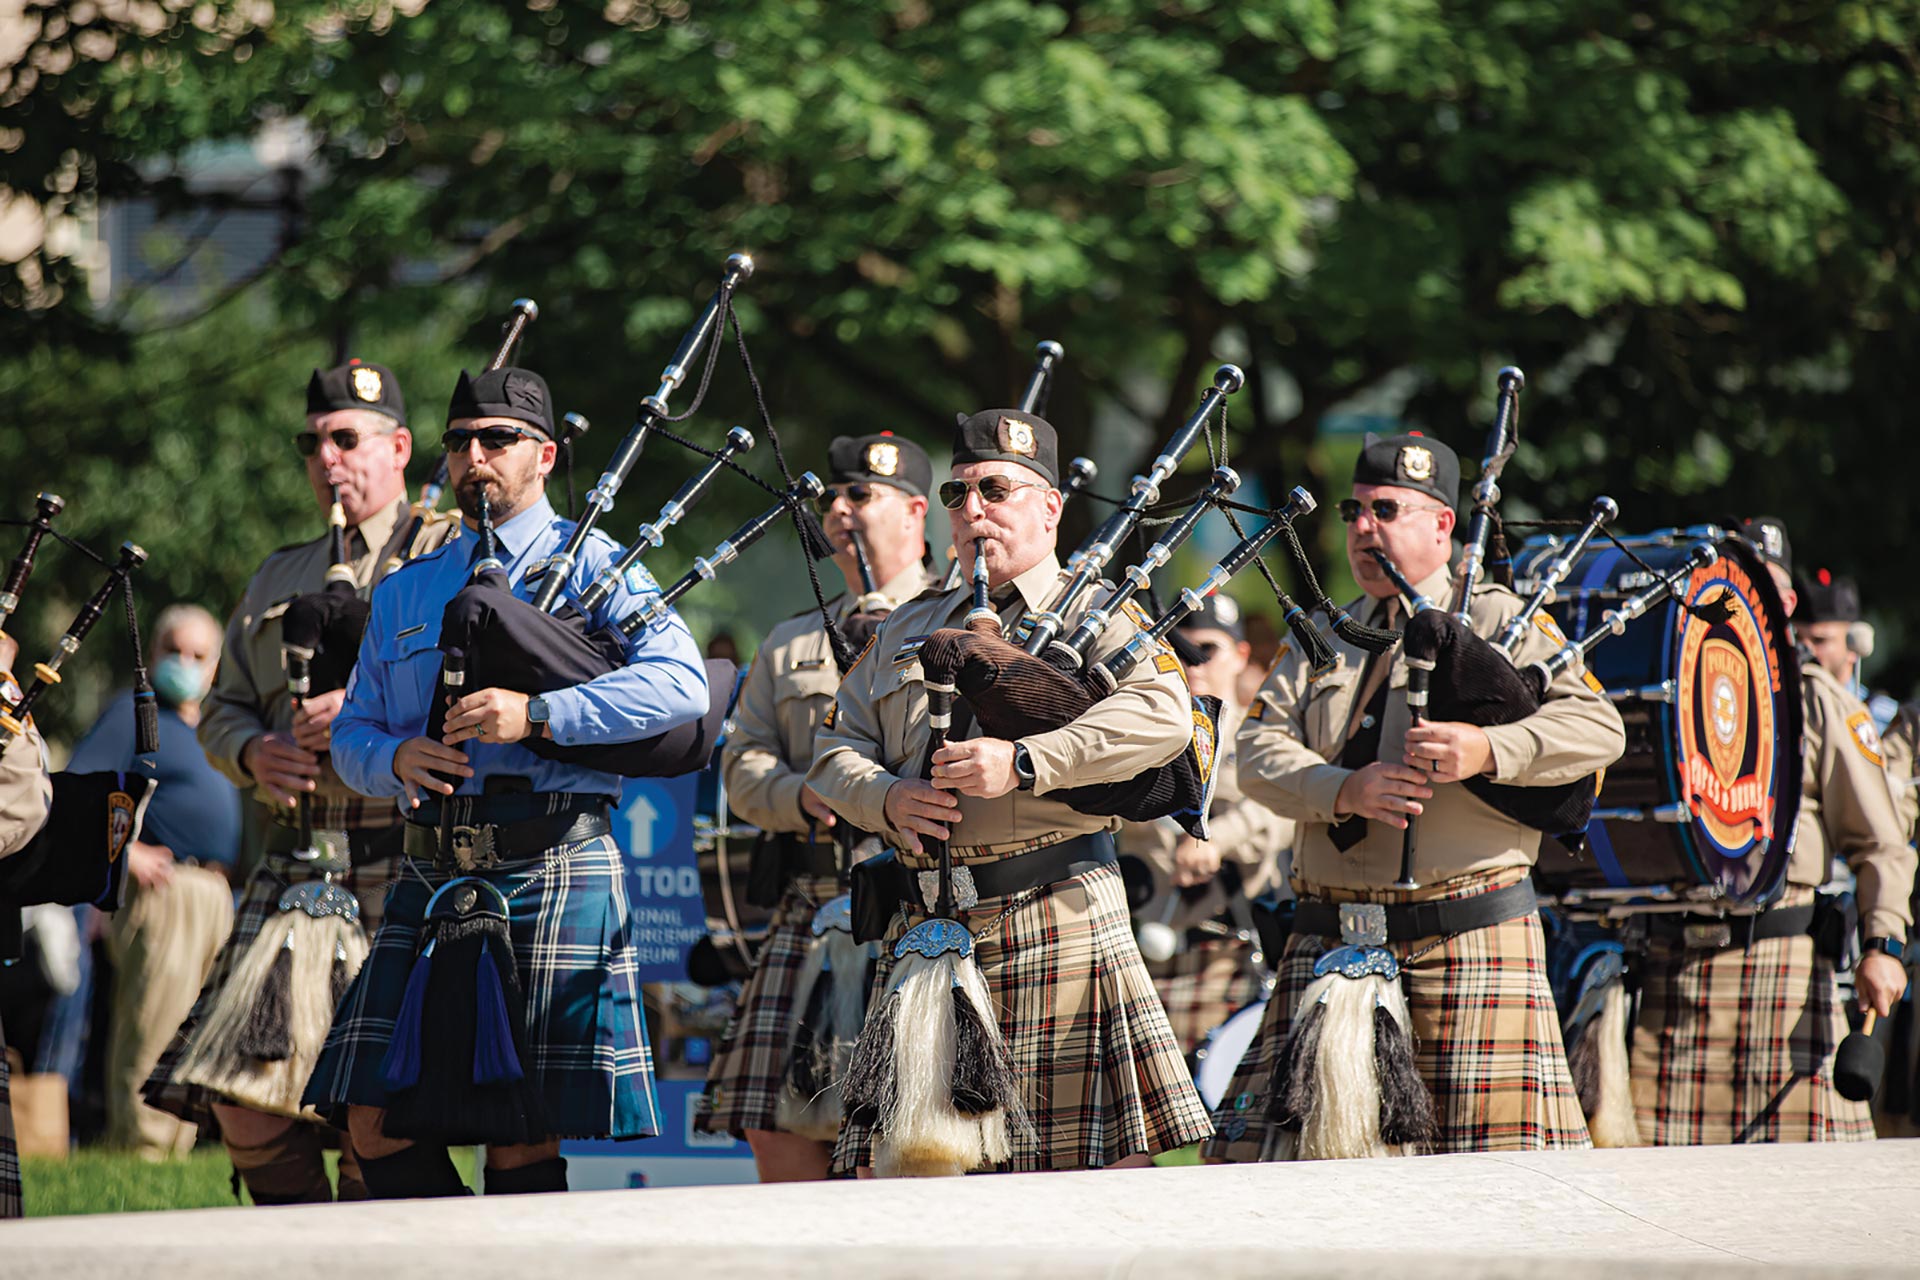 national-police-week-2022-4-bagpipers-perform-in-honor-of-the-fallen